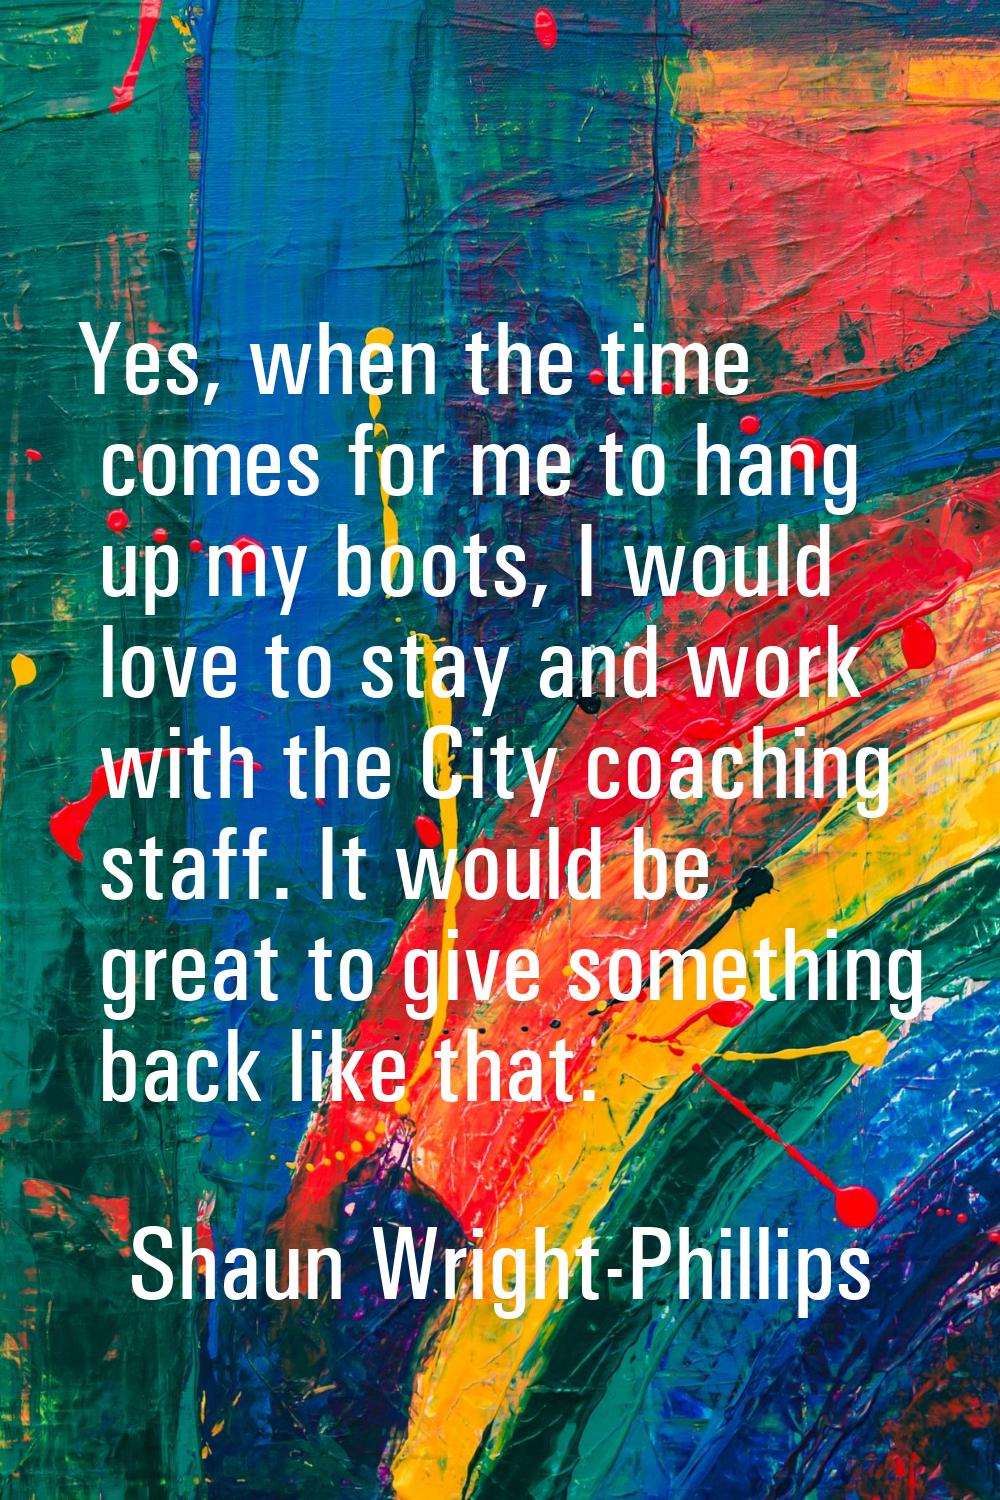 Yes, when the time comes for me to hang up my boots, I would love to stay and work with the City co